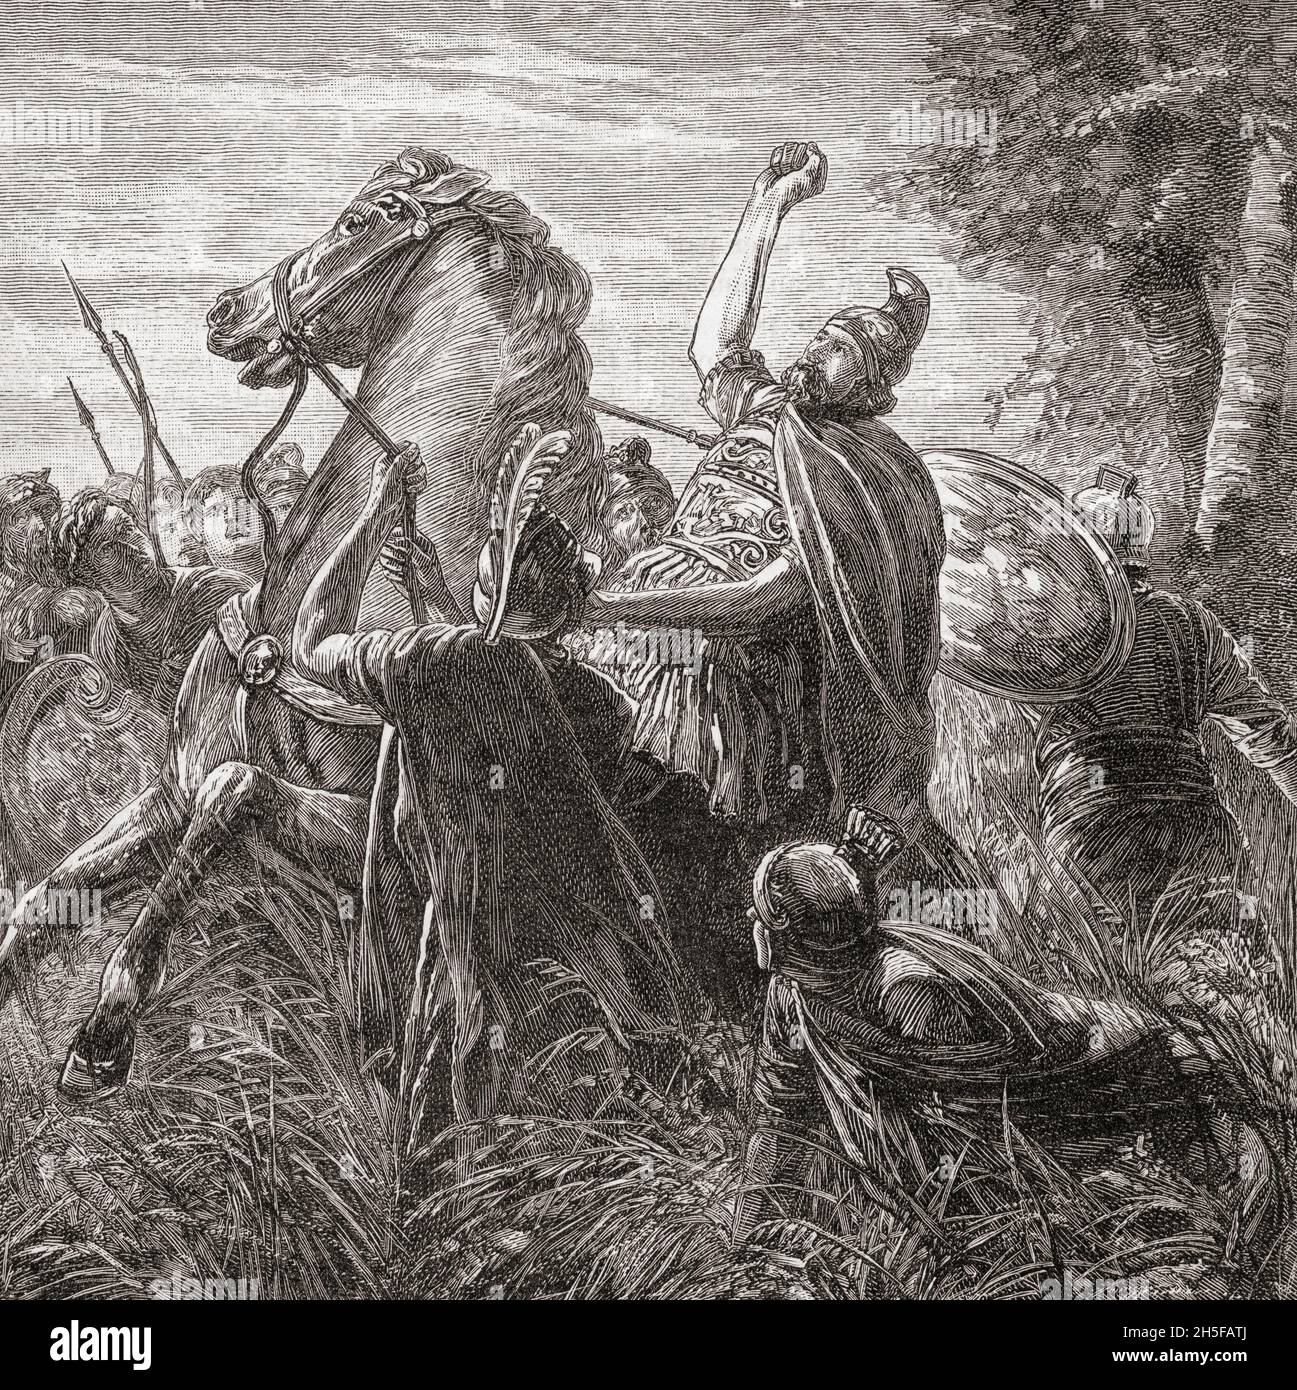 Death of Crassus at the Battle of Carrhae, 53 BC.  Marcus Licinius Crassus, 115 – 53 BC.  Roman general and statesman.  From Cassell's Illustrated Universal History, published 1883. Stock Photo